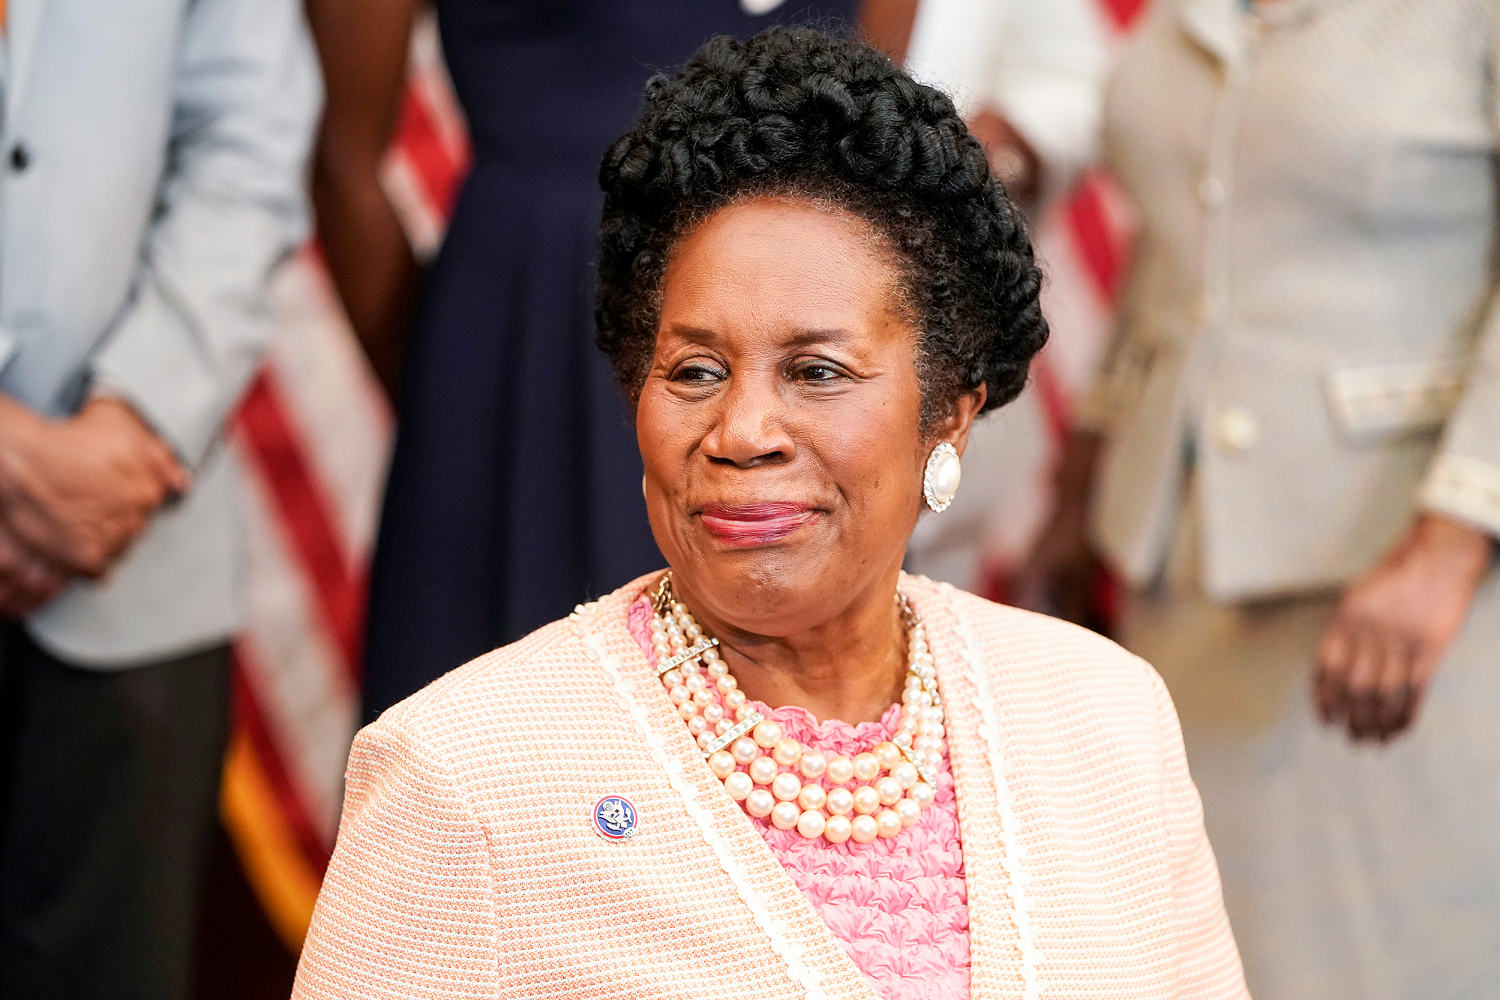 Special election to fill the late Rep. Sheila Jackson Lee's seat set for Nov. 5